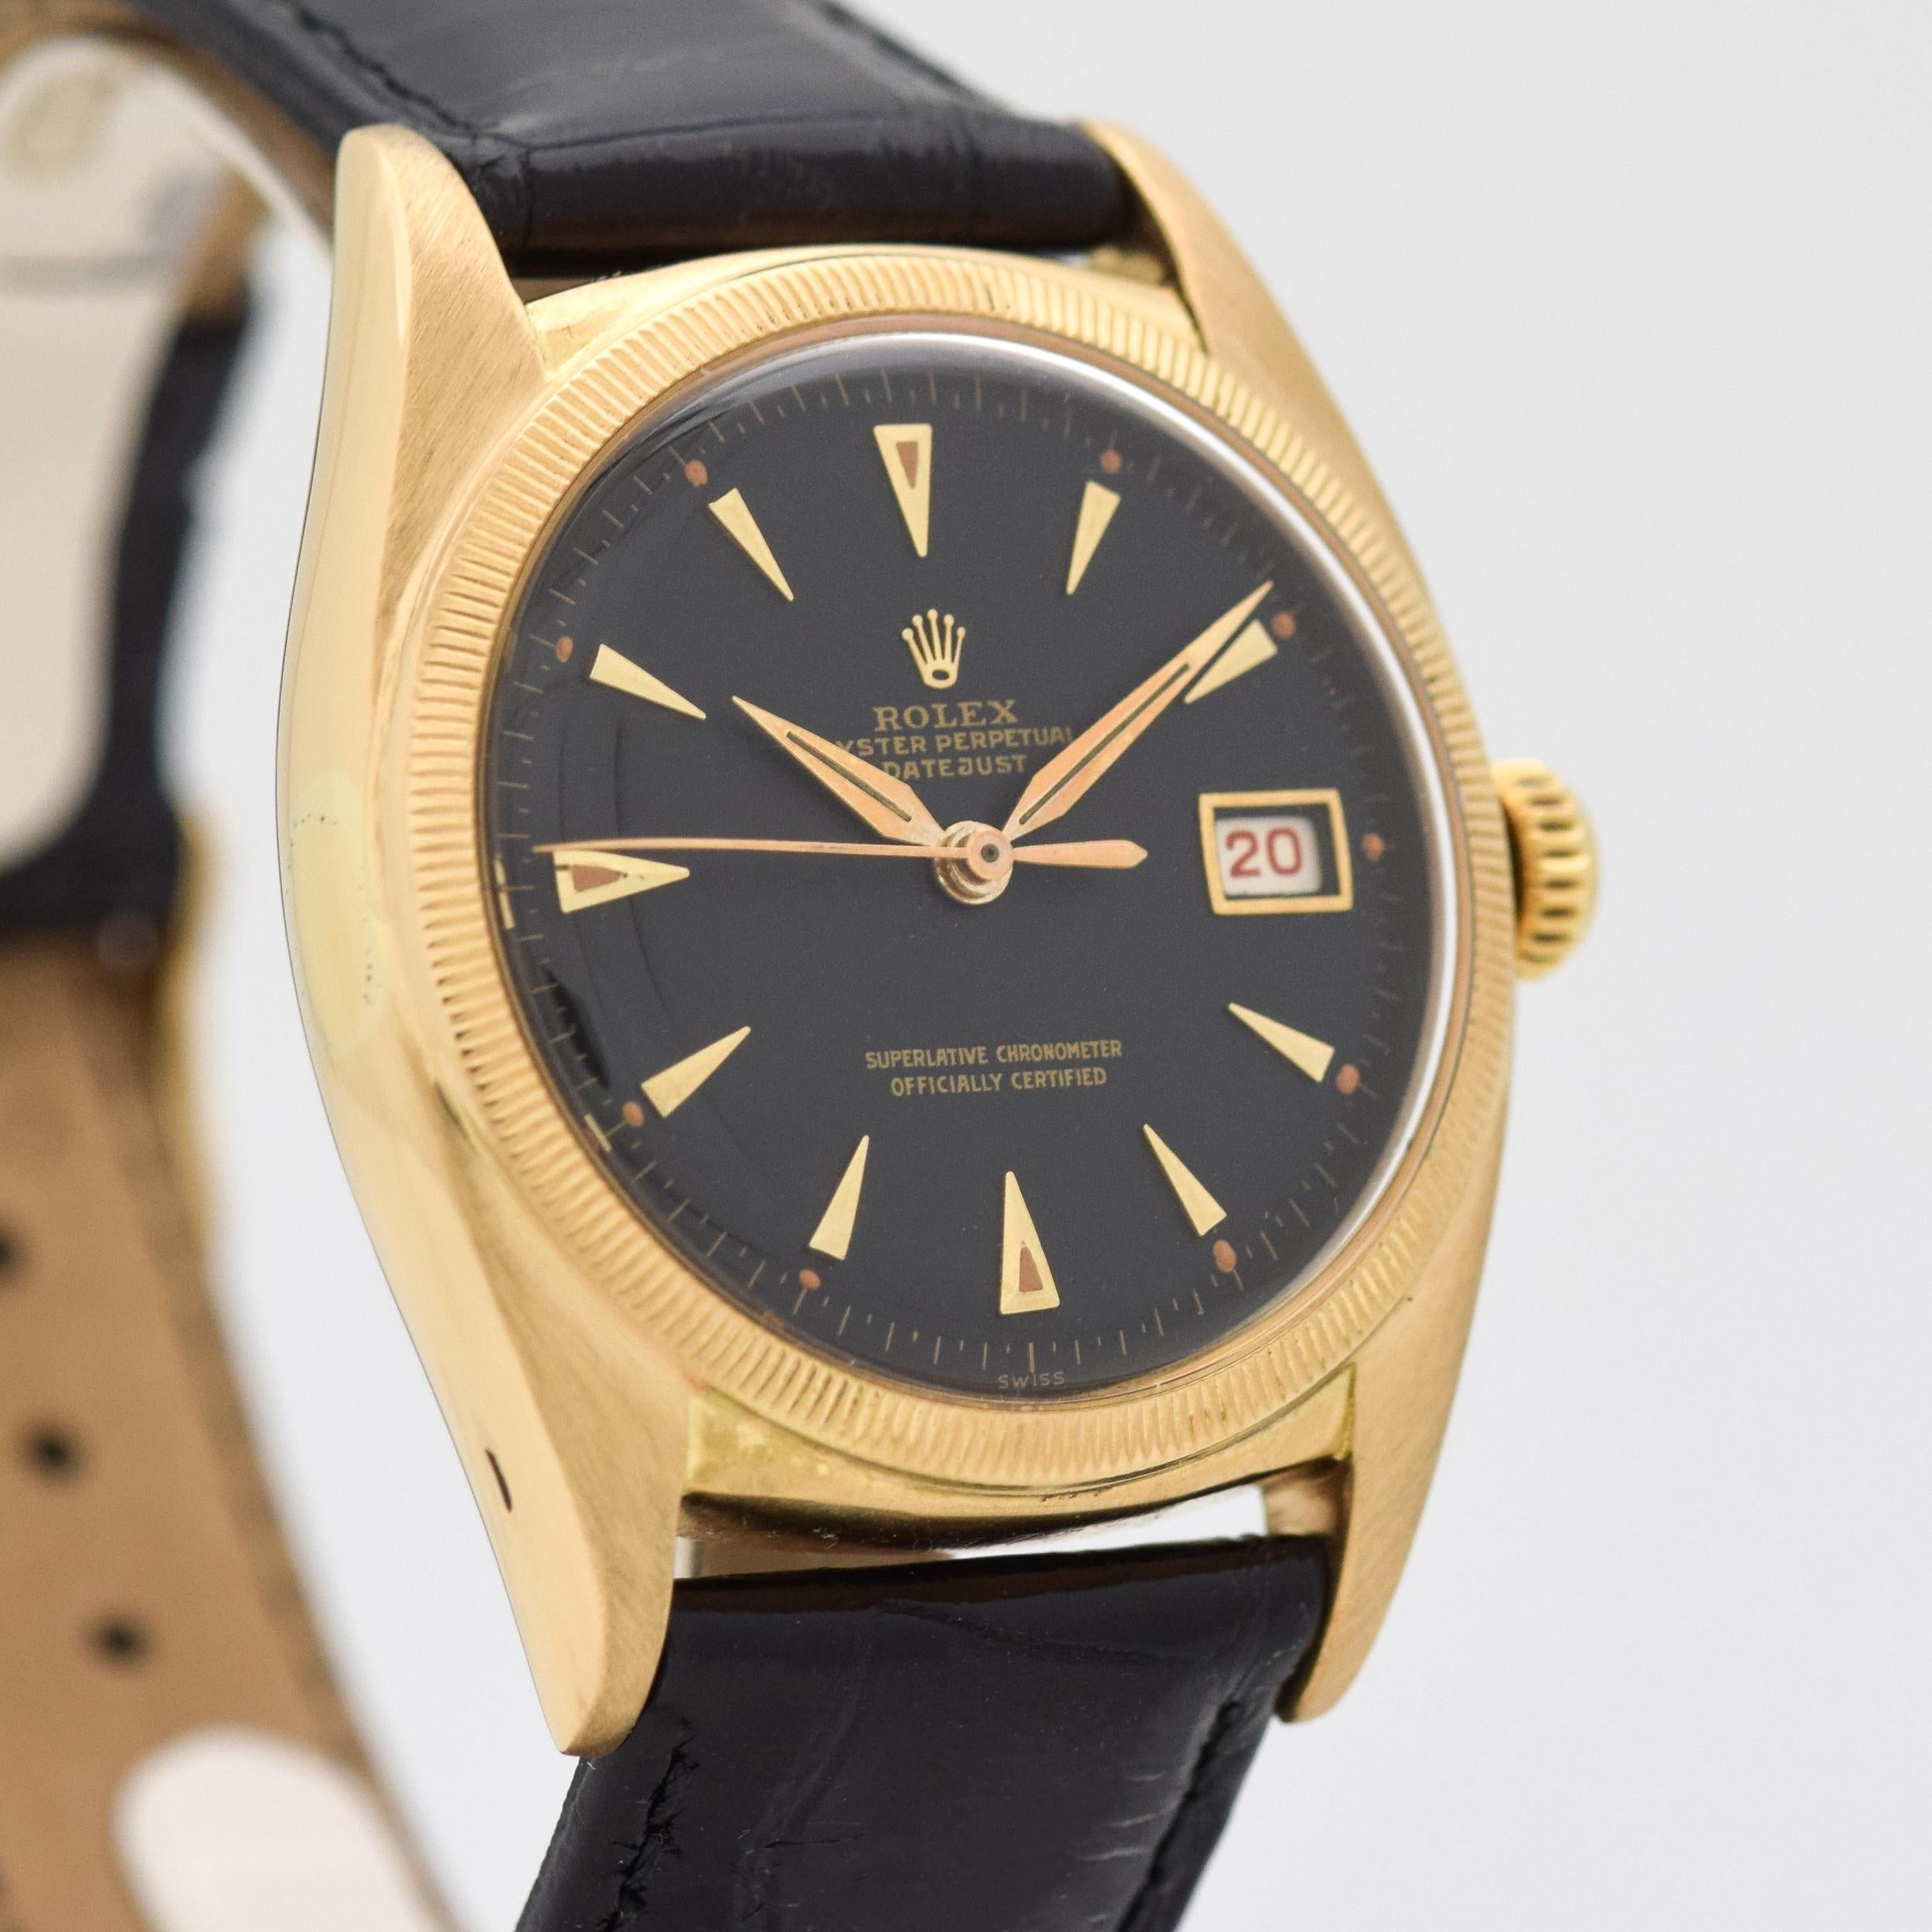 1952 Vintage Rolex Datejust Ovettone Reference 6105. 18K Yellow Gold case with a fluted bezel. Black dial with applied, yellow gold-colored, arrow markers. All Red Date Wheel. Equipped with an 20-jewel, automatic caliber movement.  Case Exterior